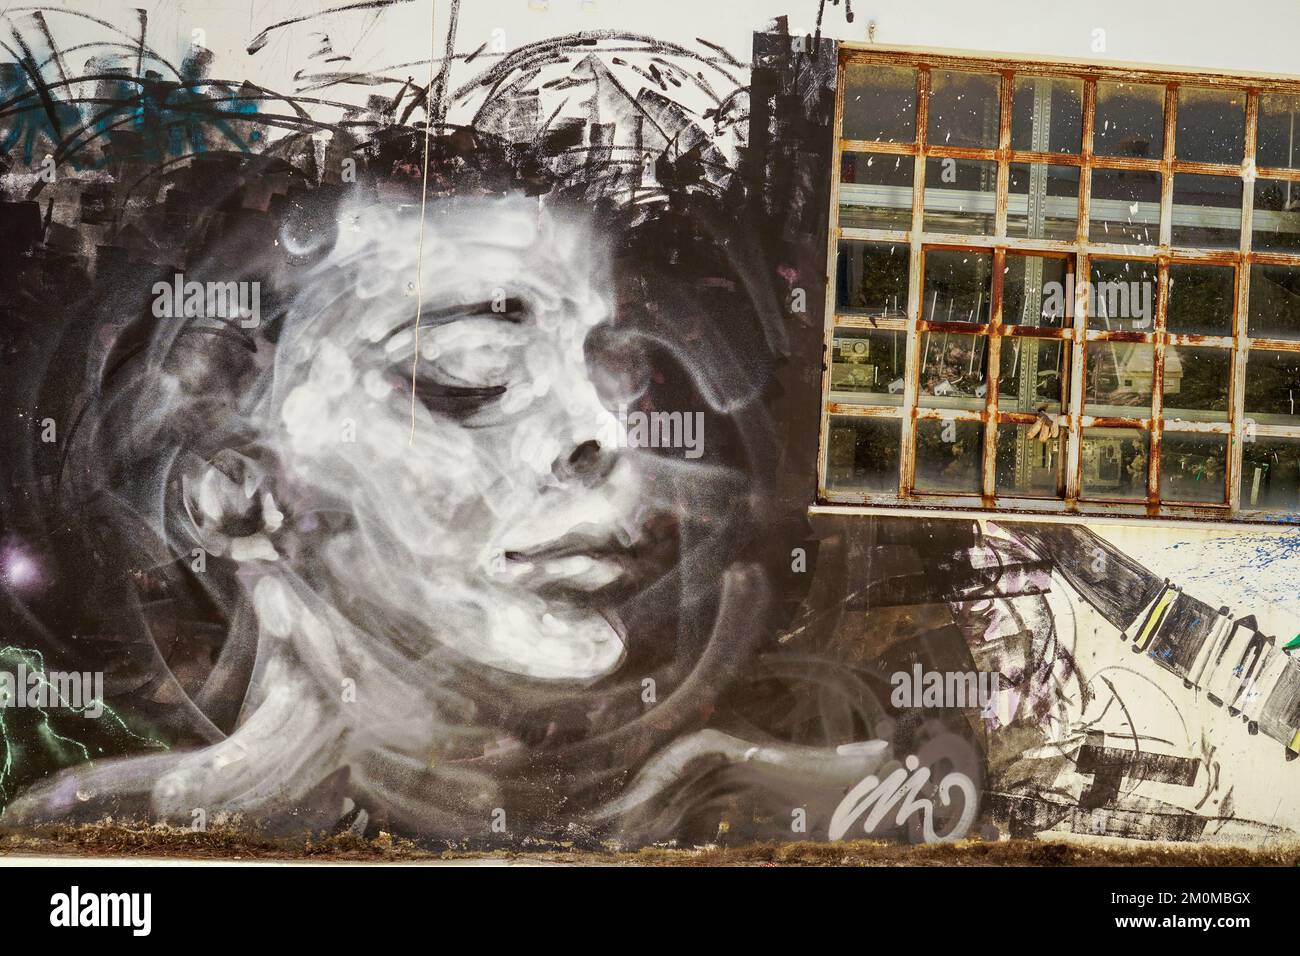 Graffiti on the facade of an abandoned building in Athens Greece Stock Photo